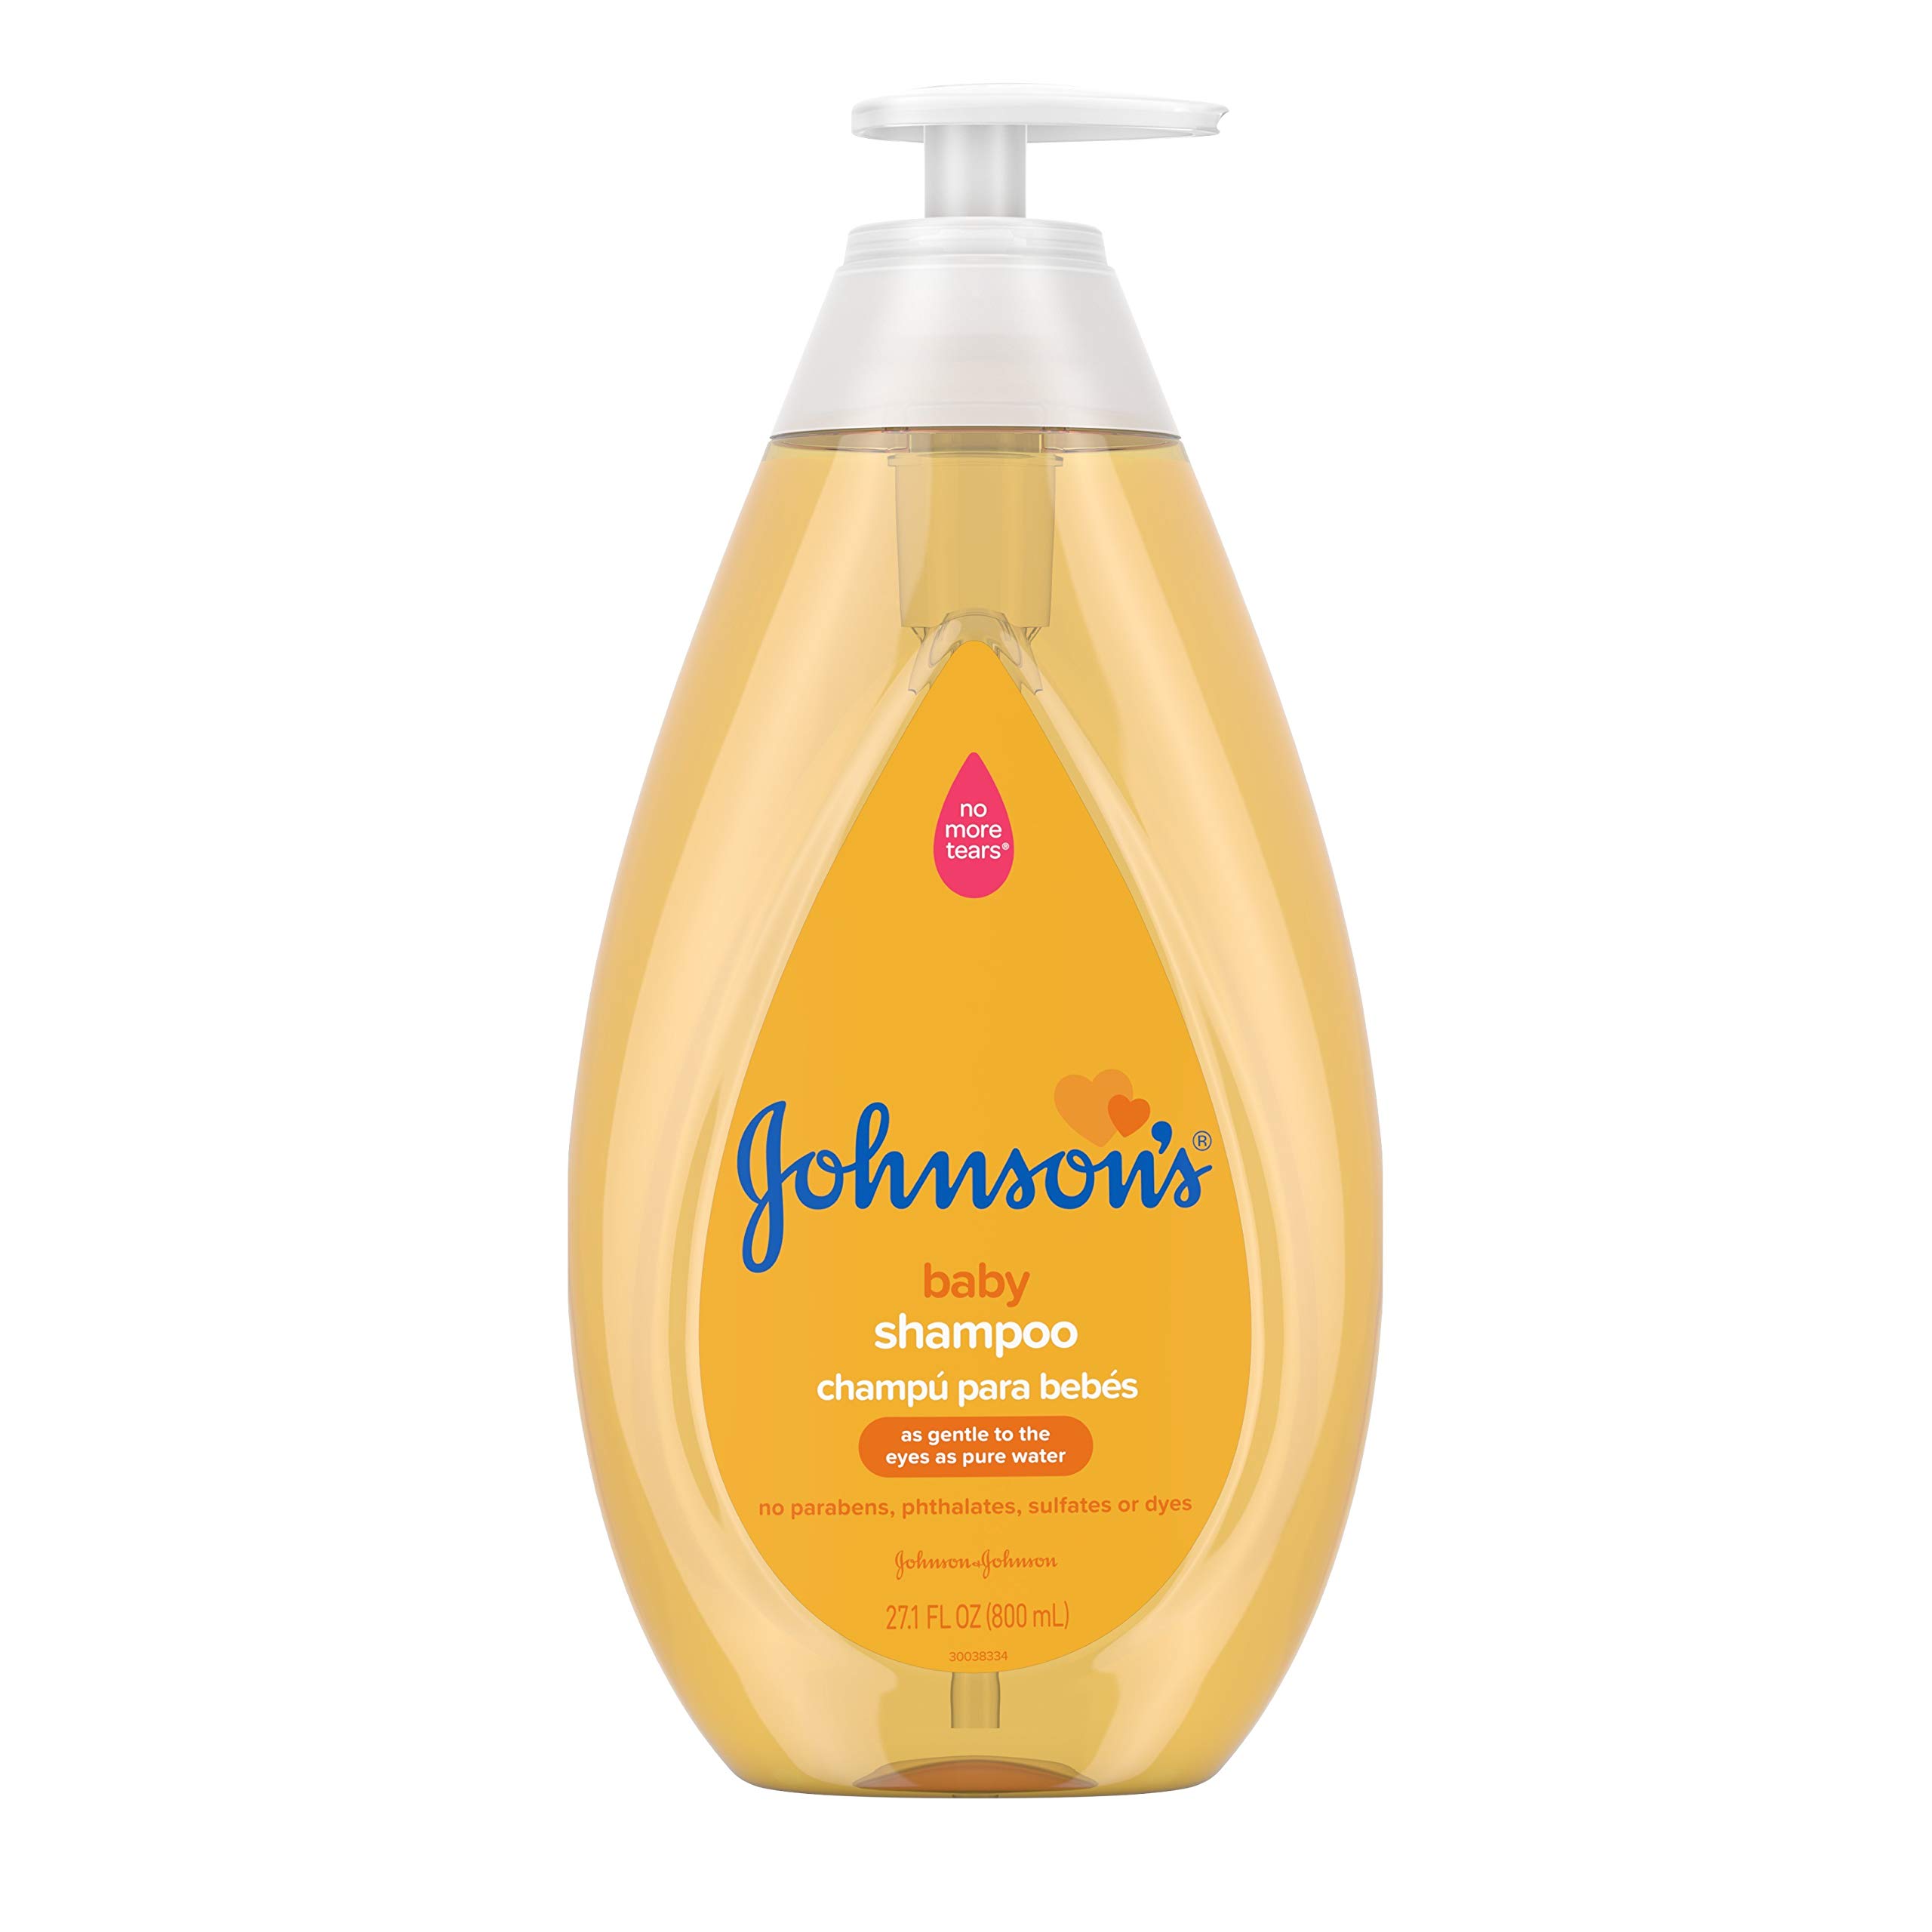 Johnson's Baby Shampoo with Tear-Free Formula, Shampoo for Baby's Delicate Scalp & Skin, Gently Washes Away Dirt & Germs, Paraben-, Phthalate-, Sulfate- & Dye-Free, 27.1 fl. oz